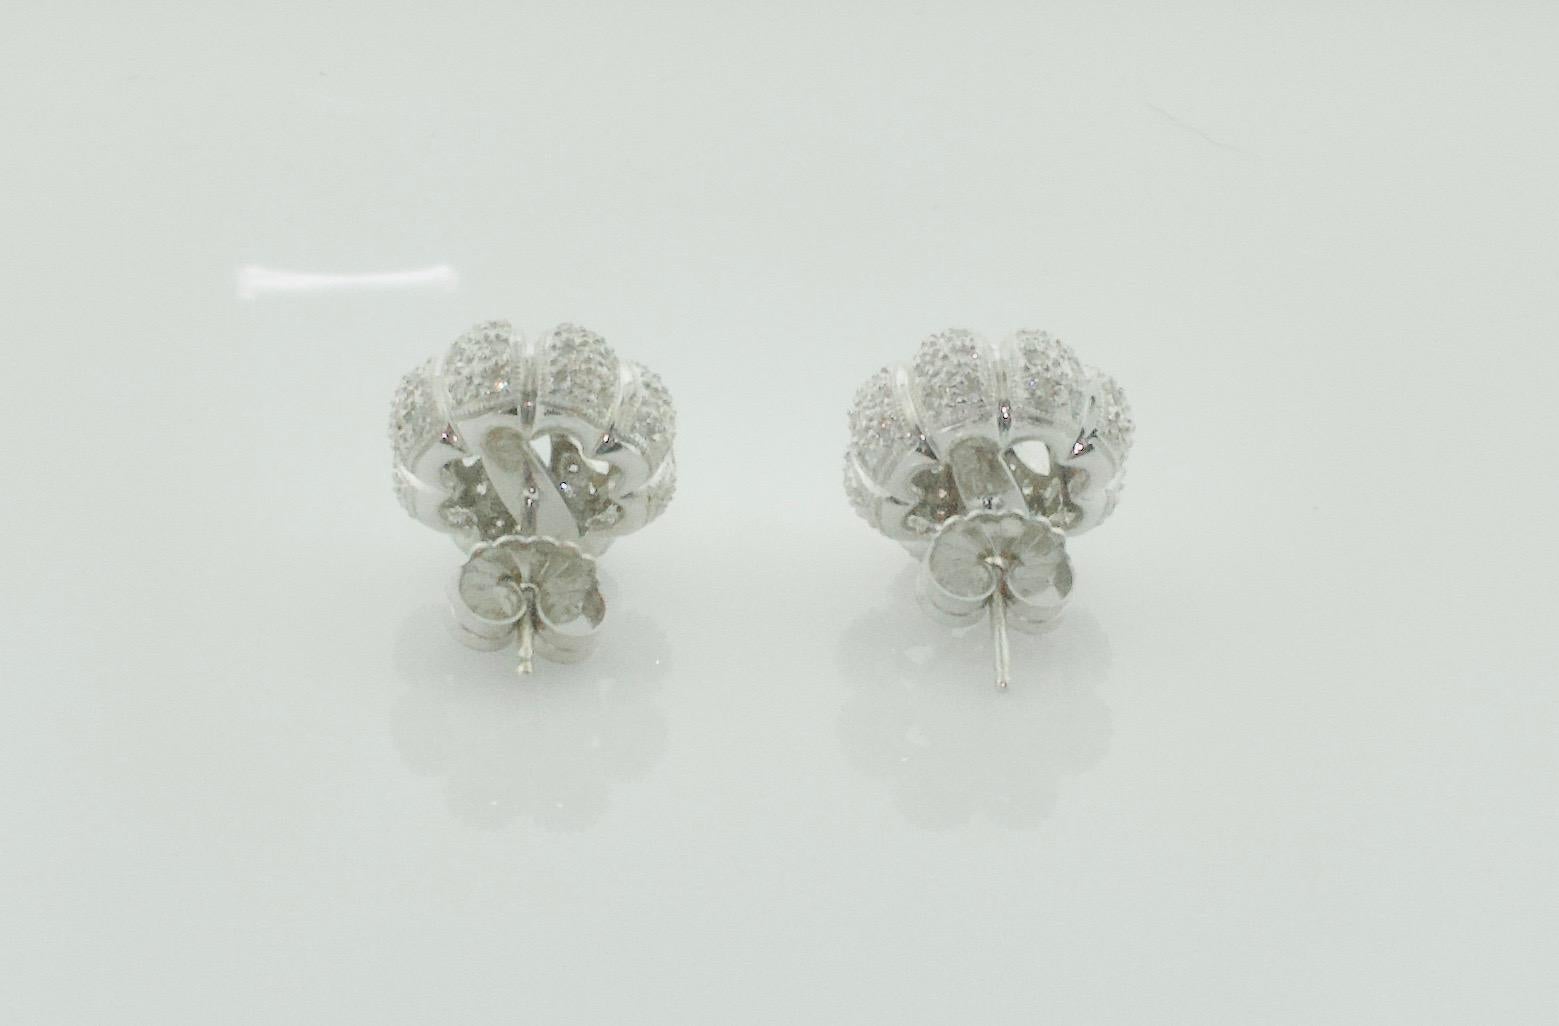 Diamond Floral Earrings in 18k White Gold 1.25 Carats Total For Sale 2